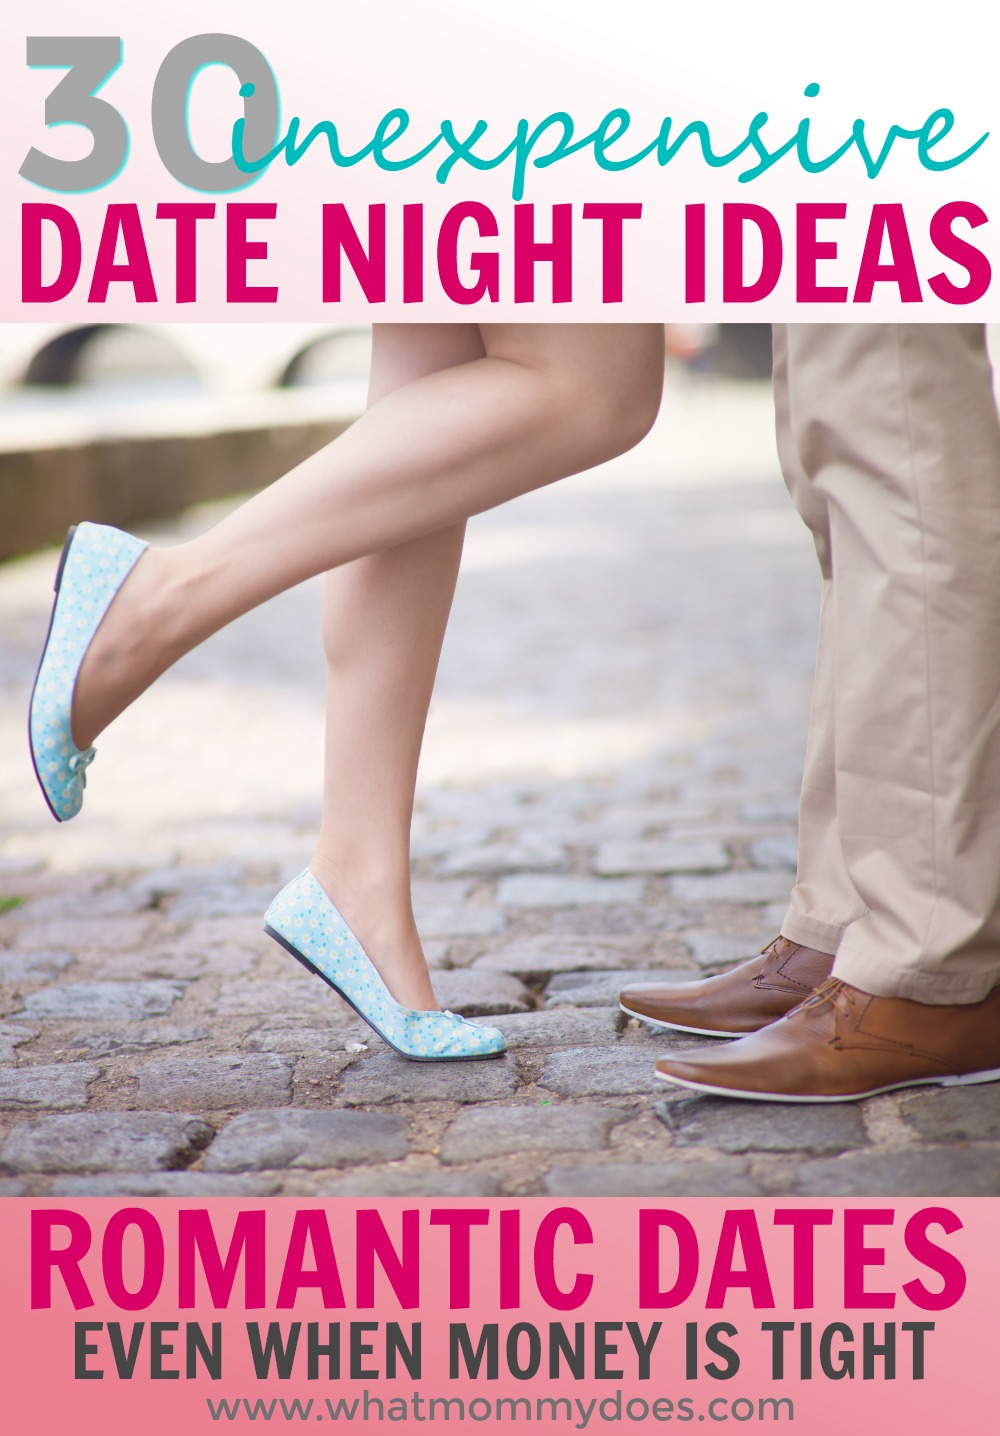 Cheap Date Night Ideas Budget Friendly ROMANTIC Ideas What Mommy Does